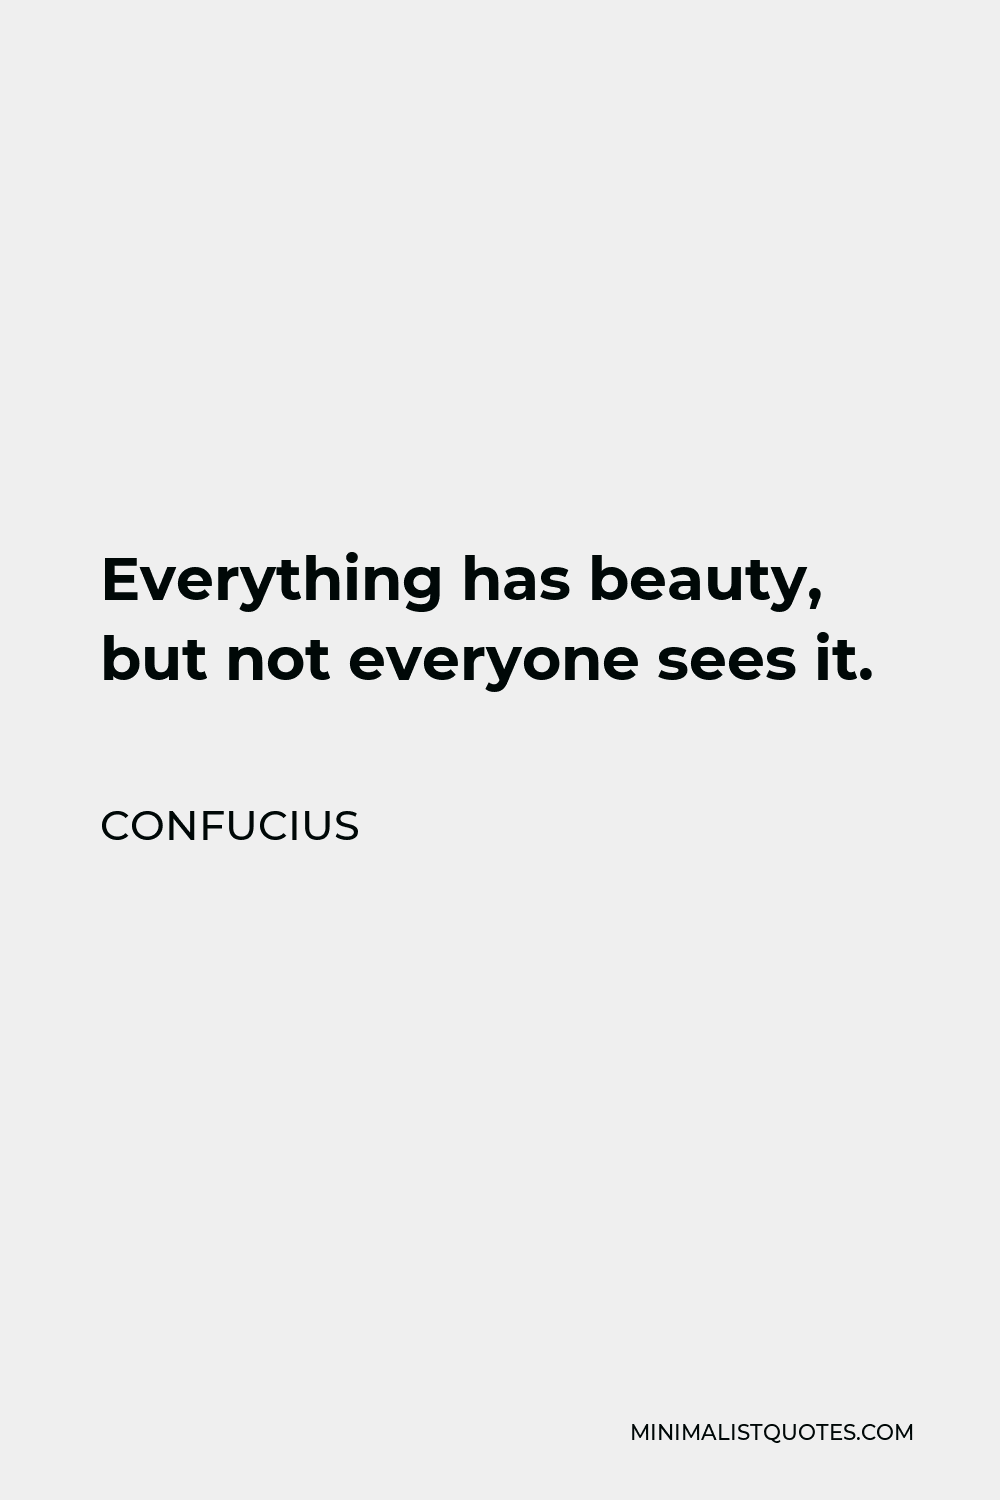 Confucius Quote - Everything has beauty, but not everyone sees it.